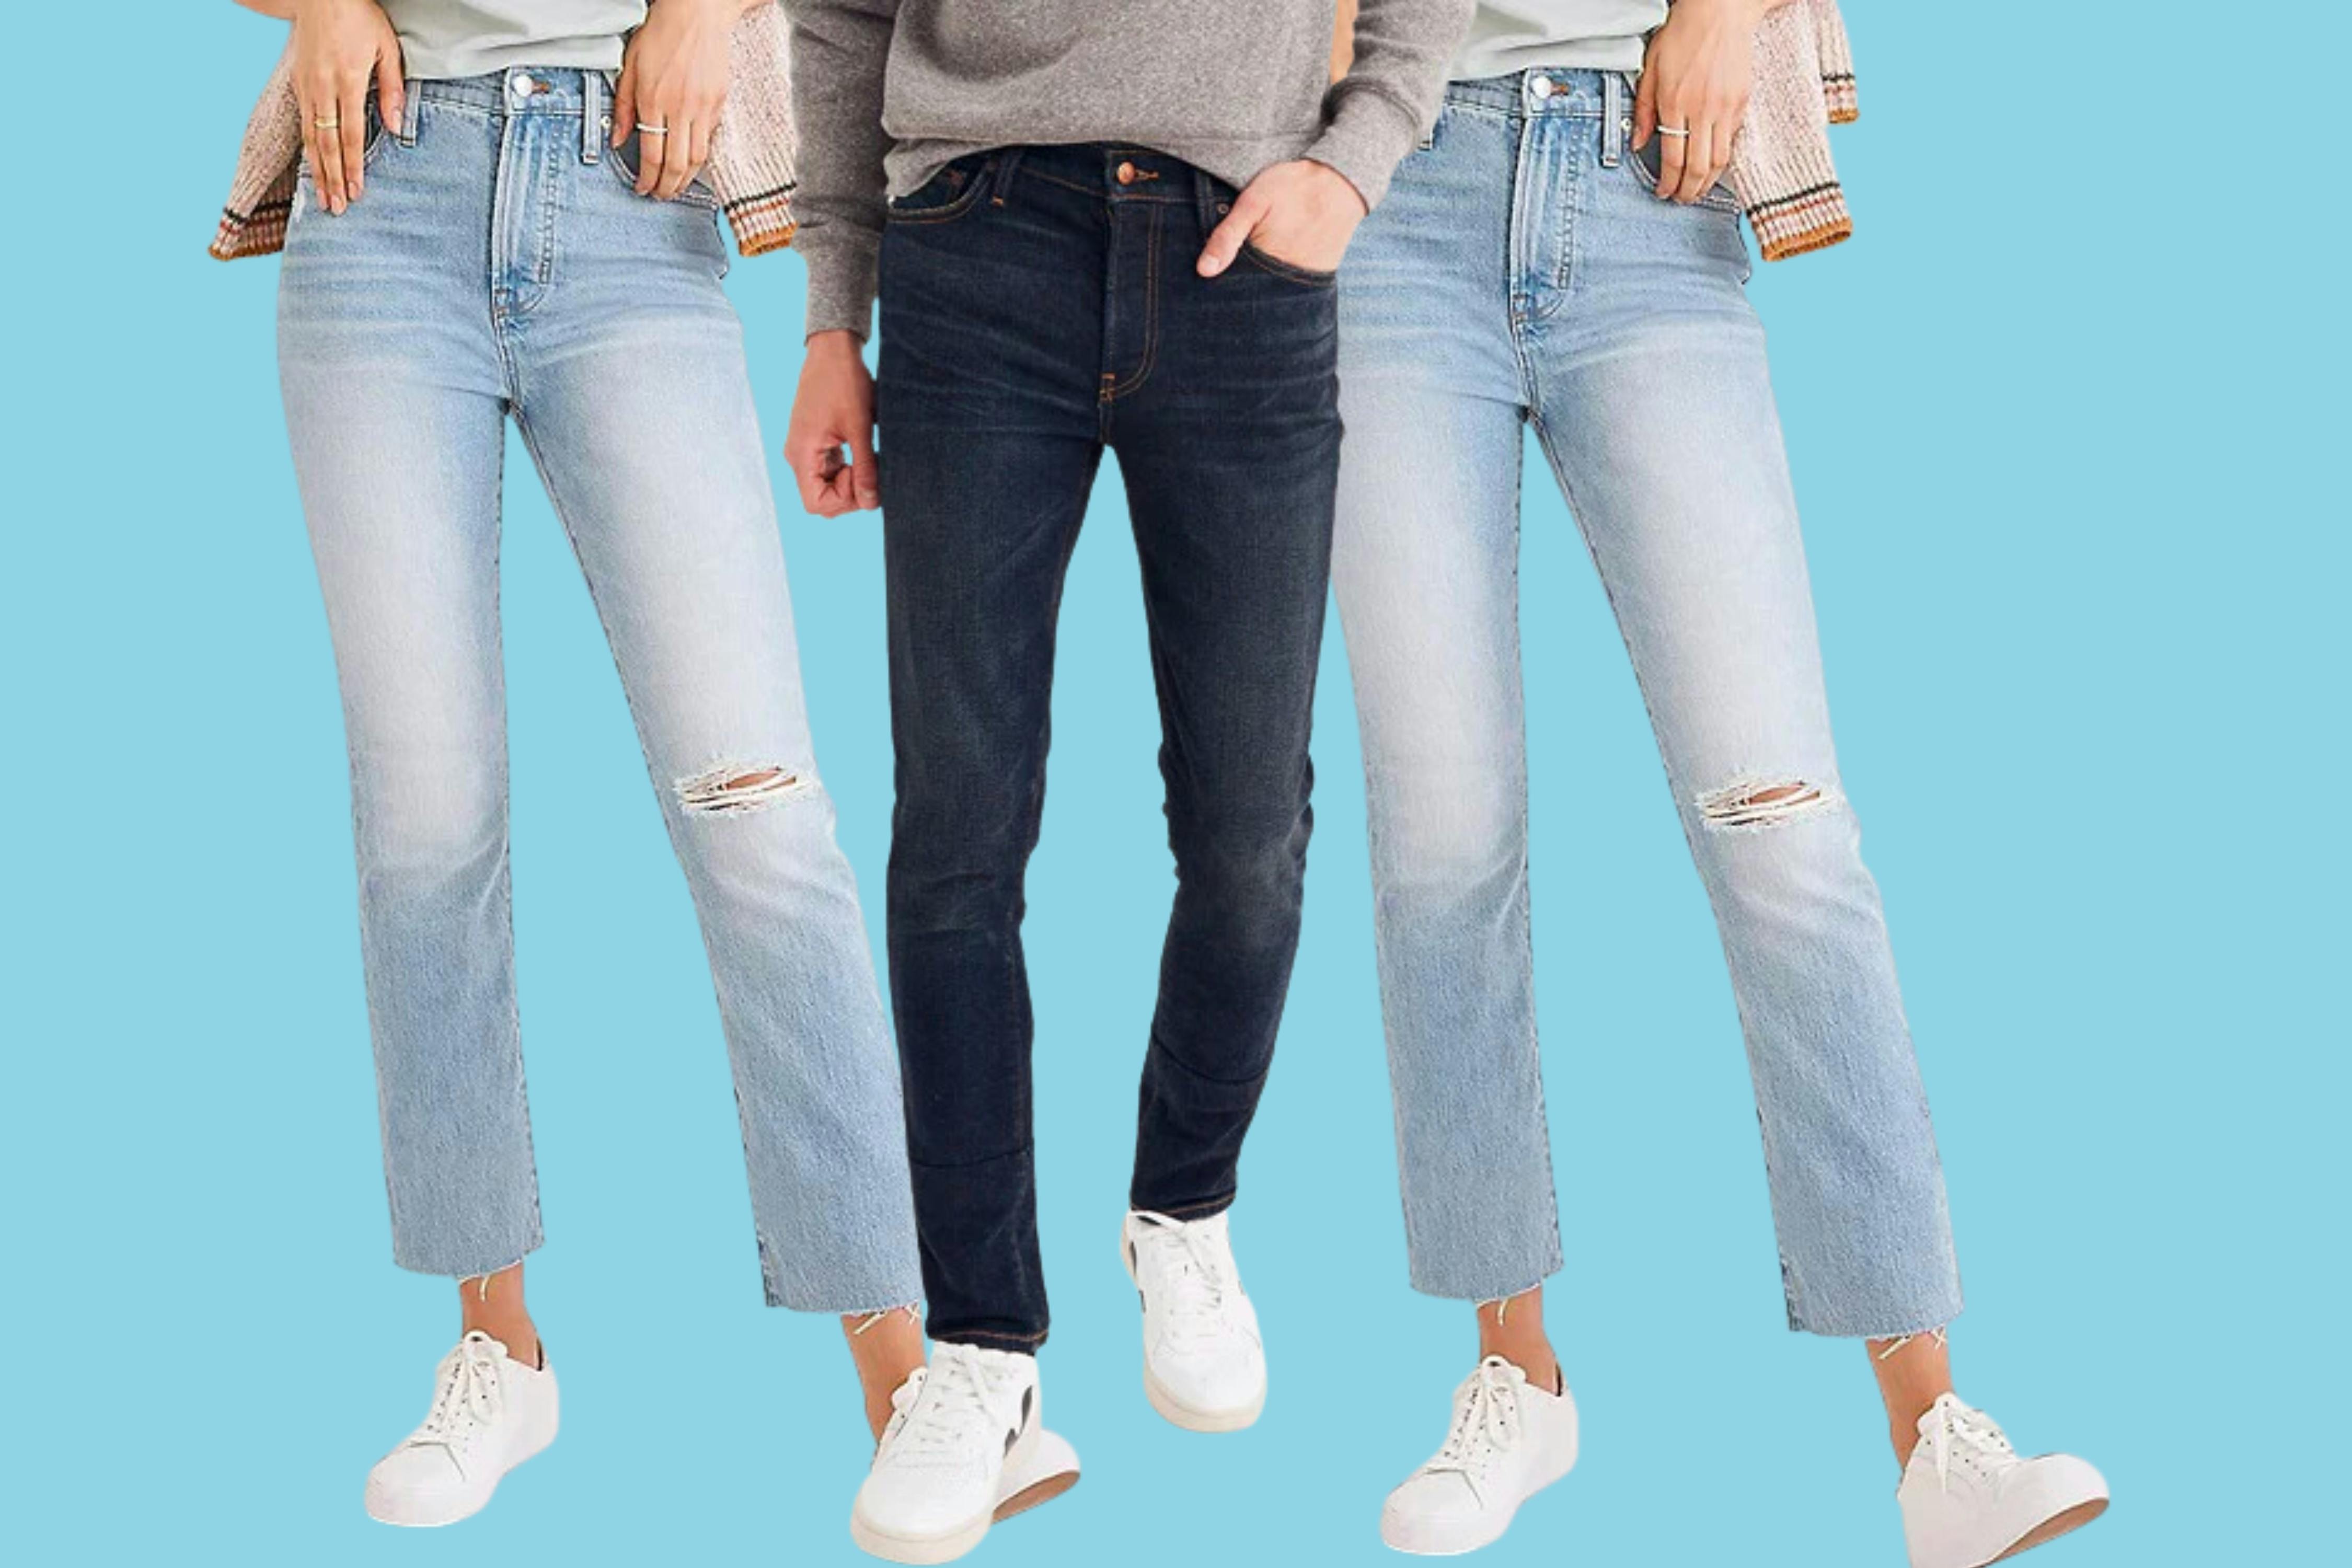 Madewell Apparel, Up to 90% Off at Zulily - The Krazy Coupon Lady